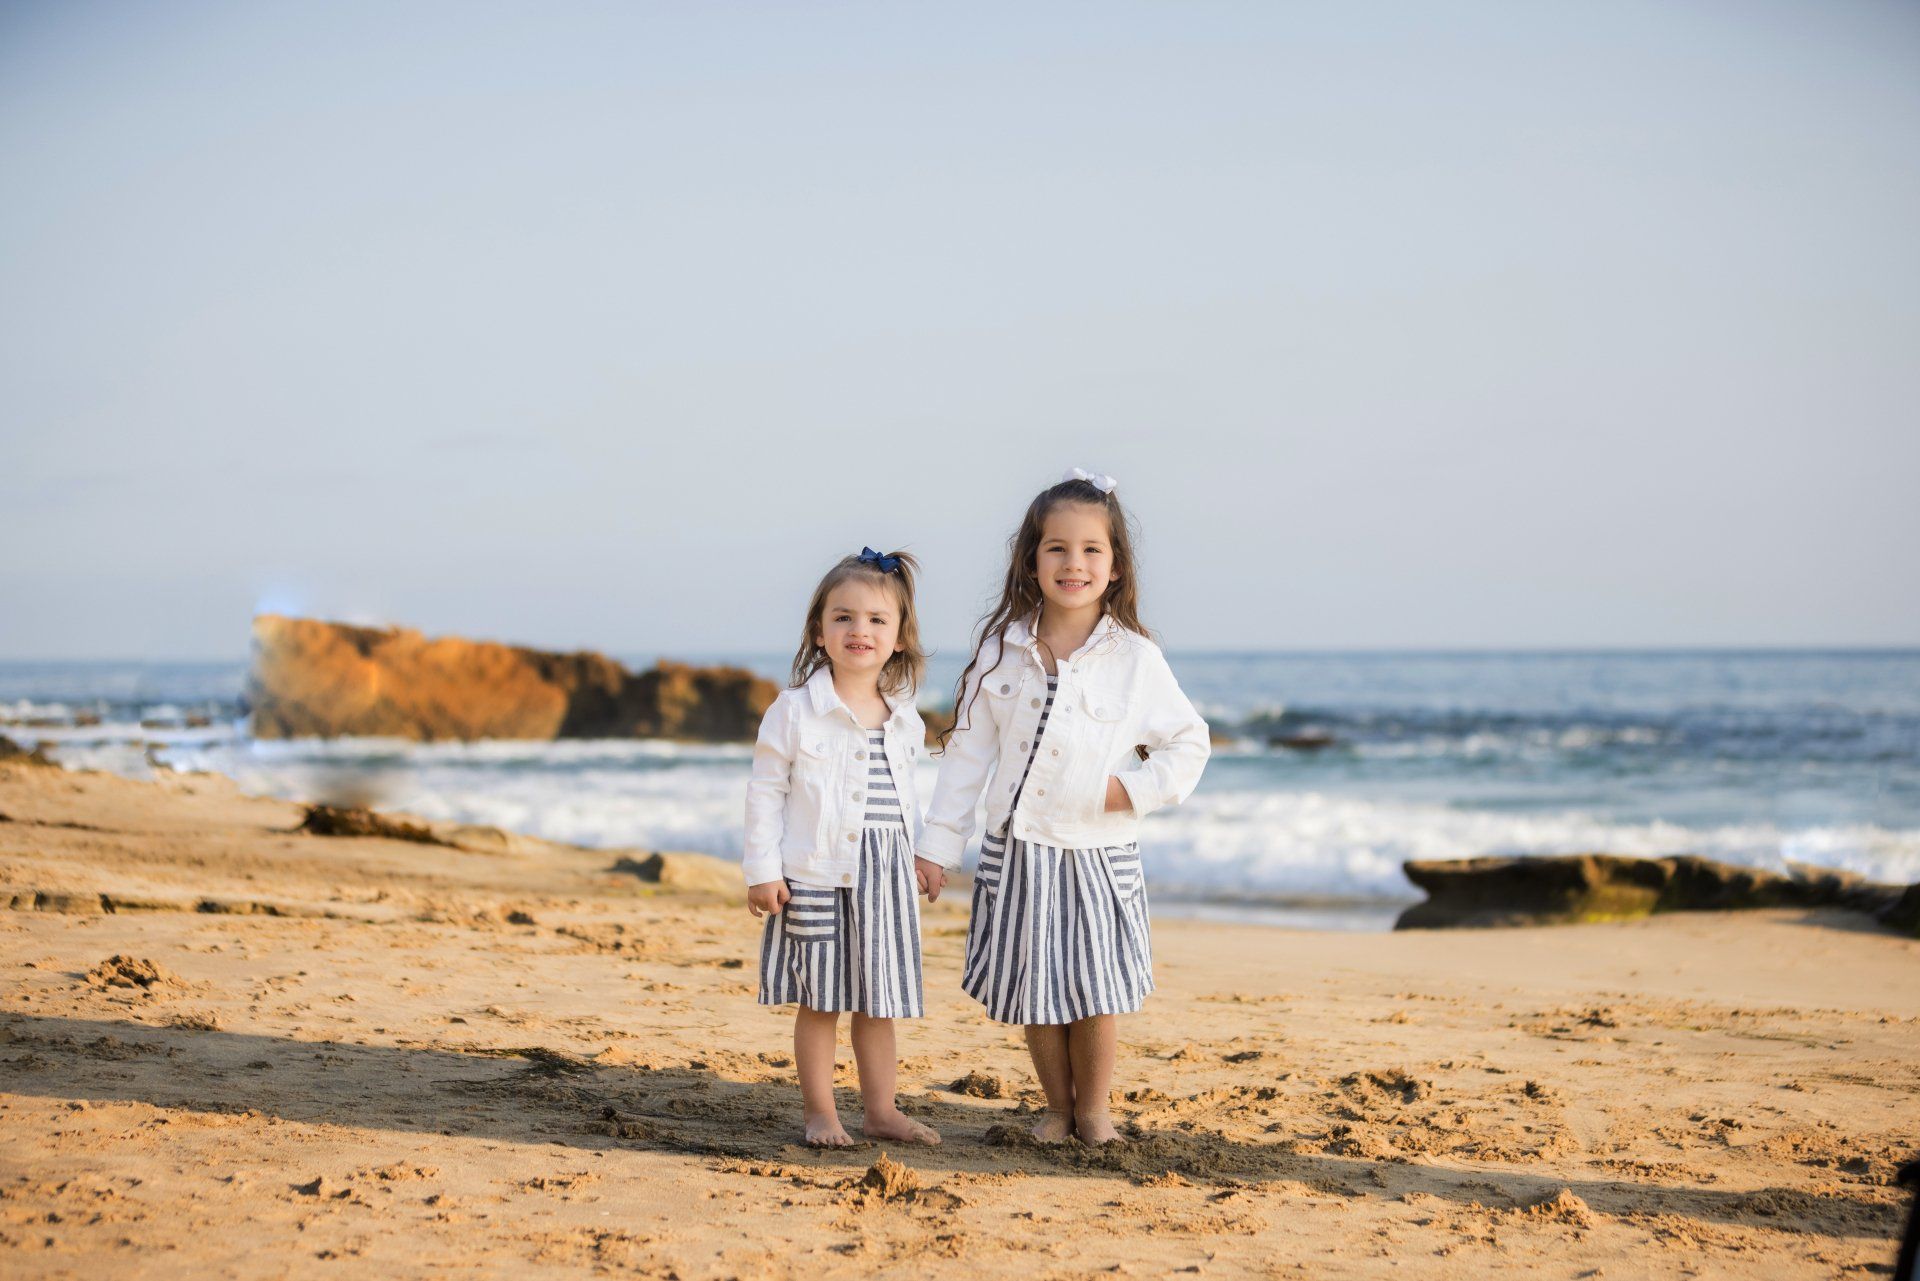 When Is The Best Time For A Beach Family Portrait Session? - Steven Cotton  Photography